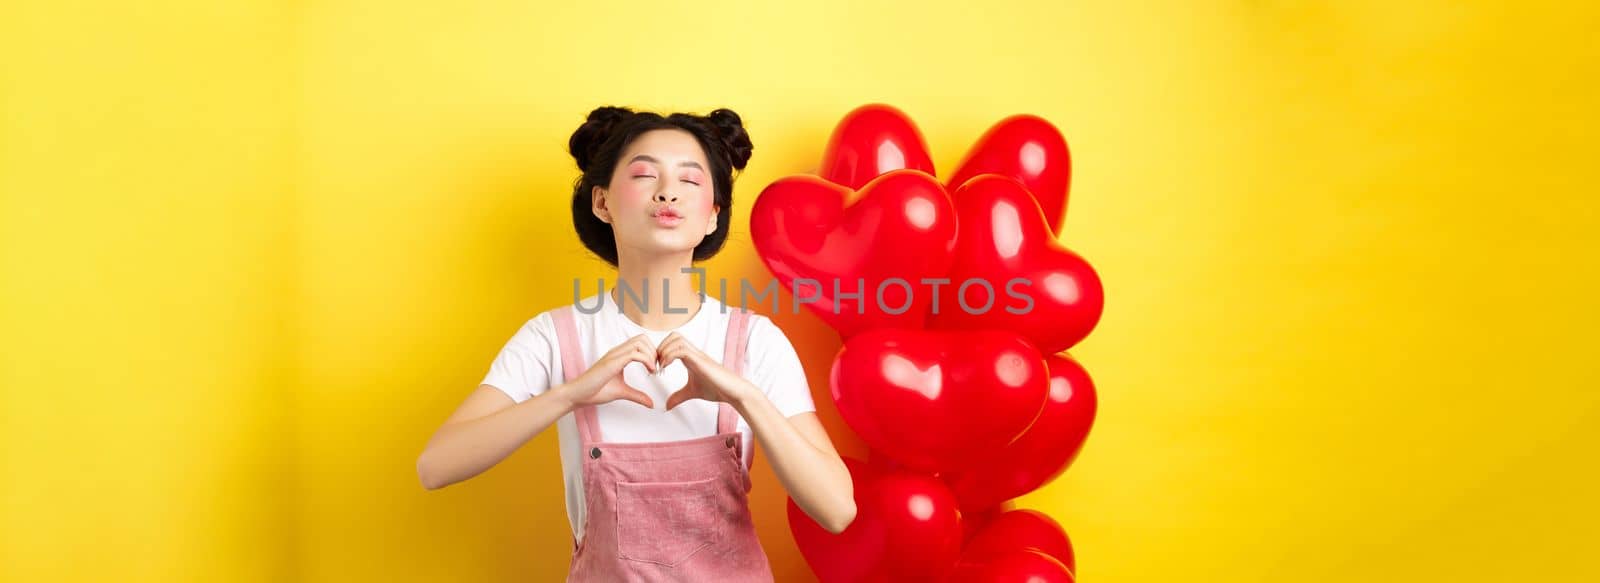 Romantic girl close eyes and pucker lips for kiss, showing I love you heart gesture, standing near cute red balloons, kissing lover over yellow background by Benzoix